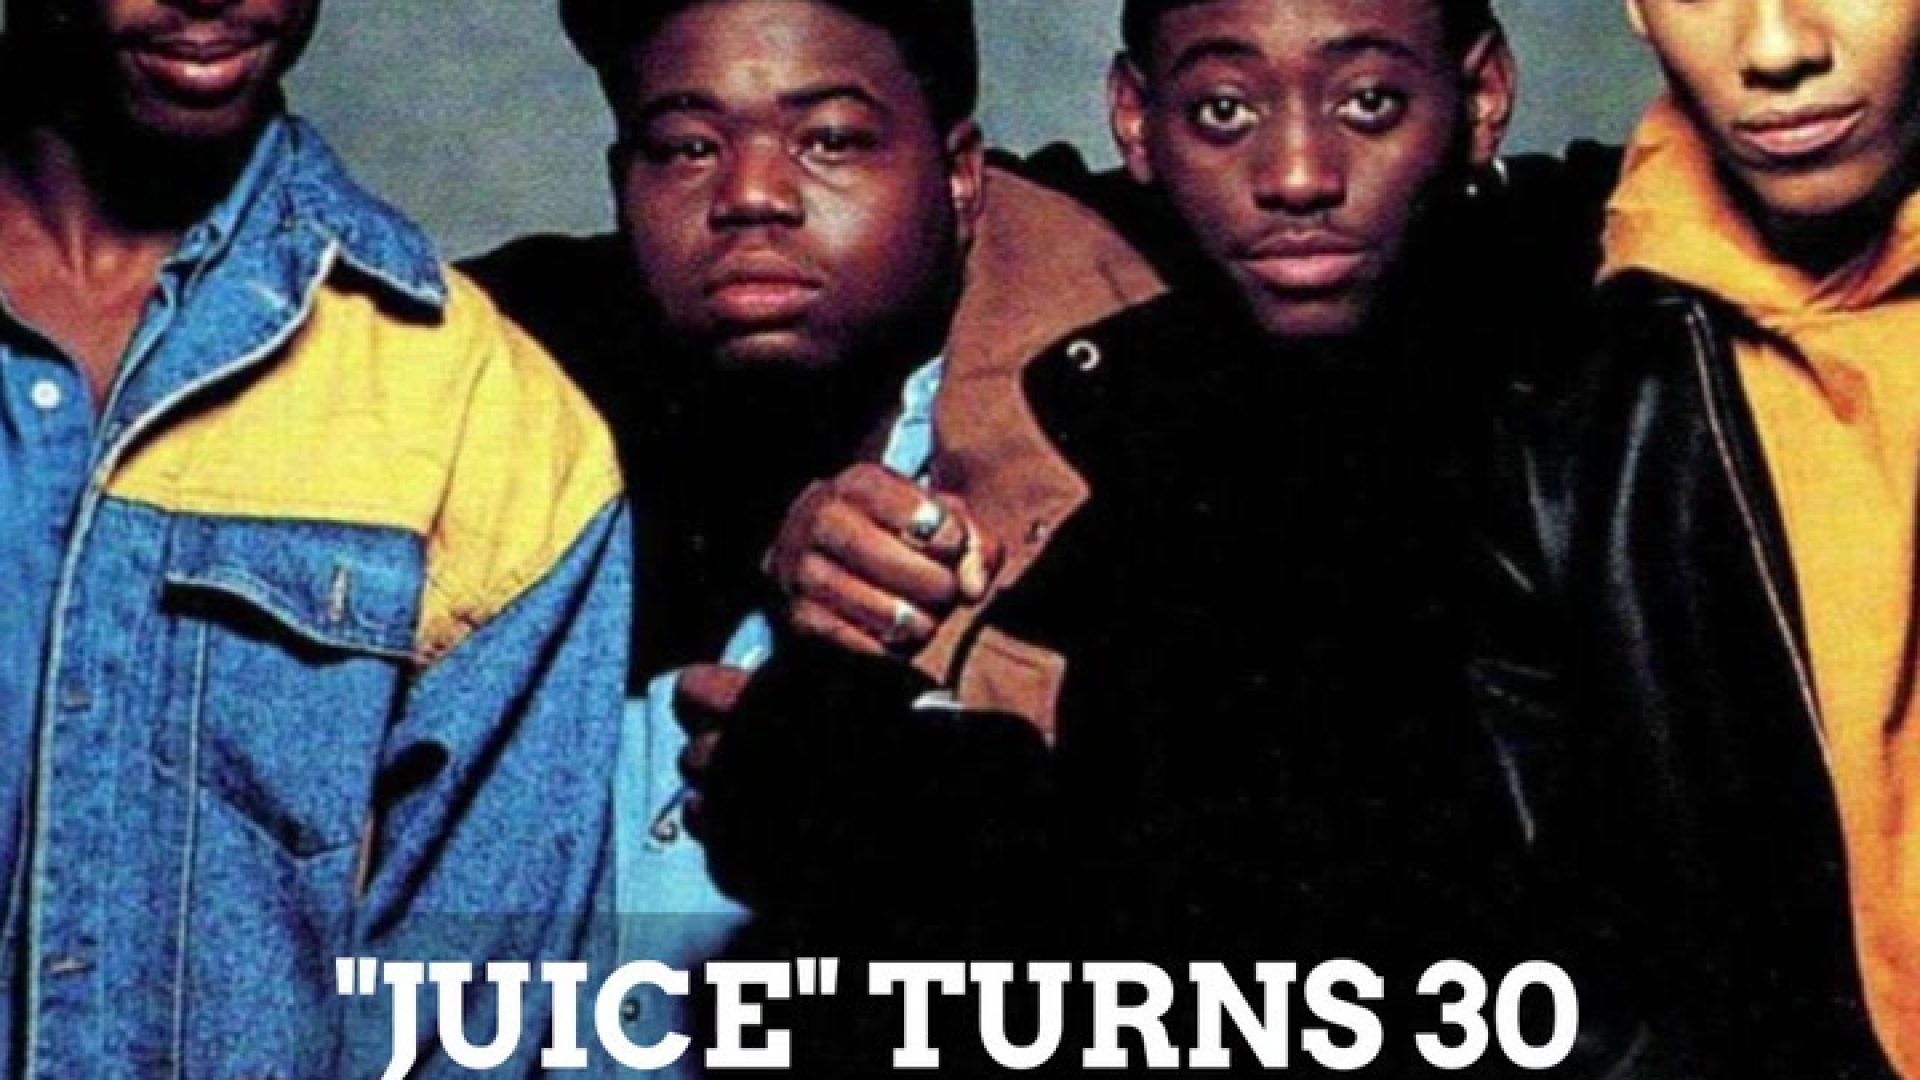 In My Feed | “Juice” Turns 30